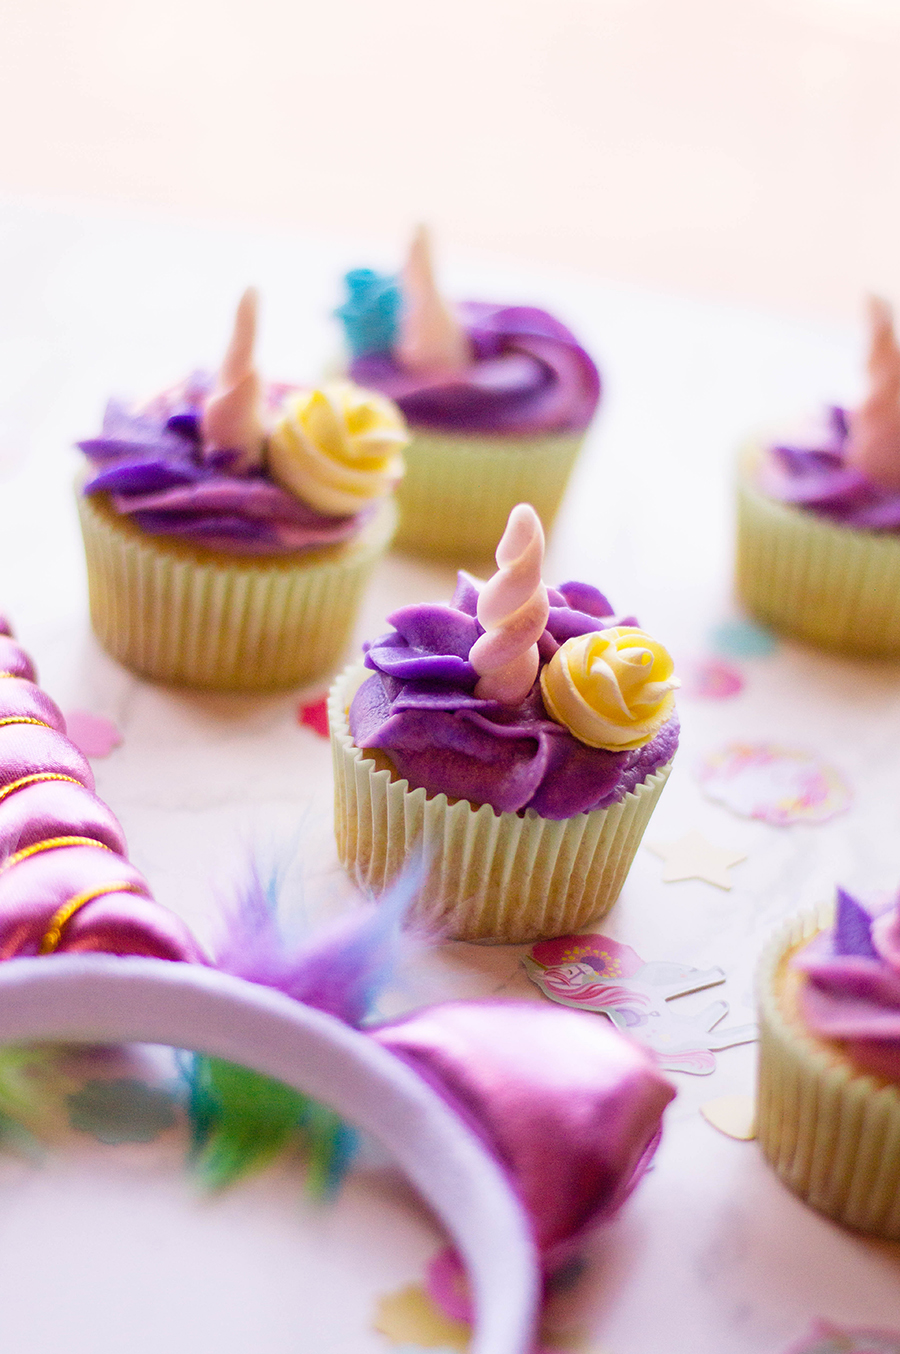 Throwing parties doesn't have to be nerve-racking. Planning on going with a unicorn-theme celebration? Here's an easy way to make Unicorn Cupcakes.